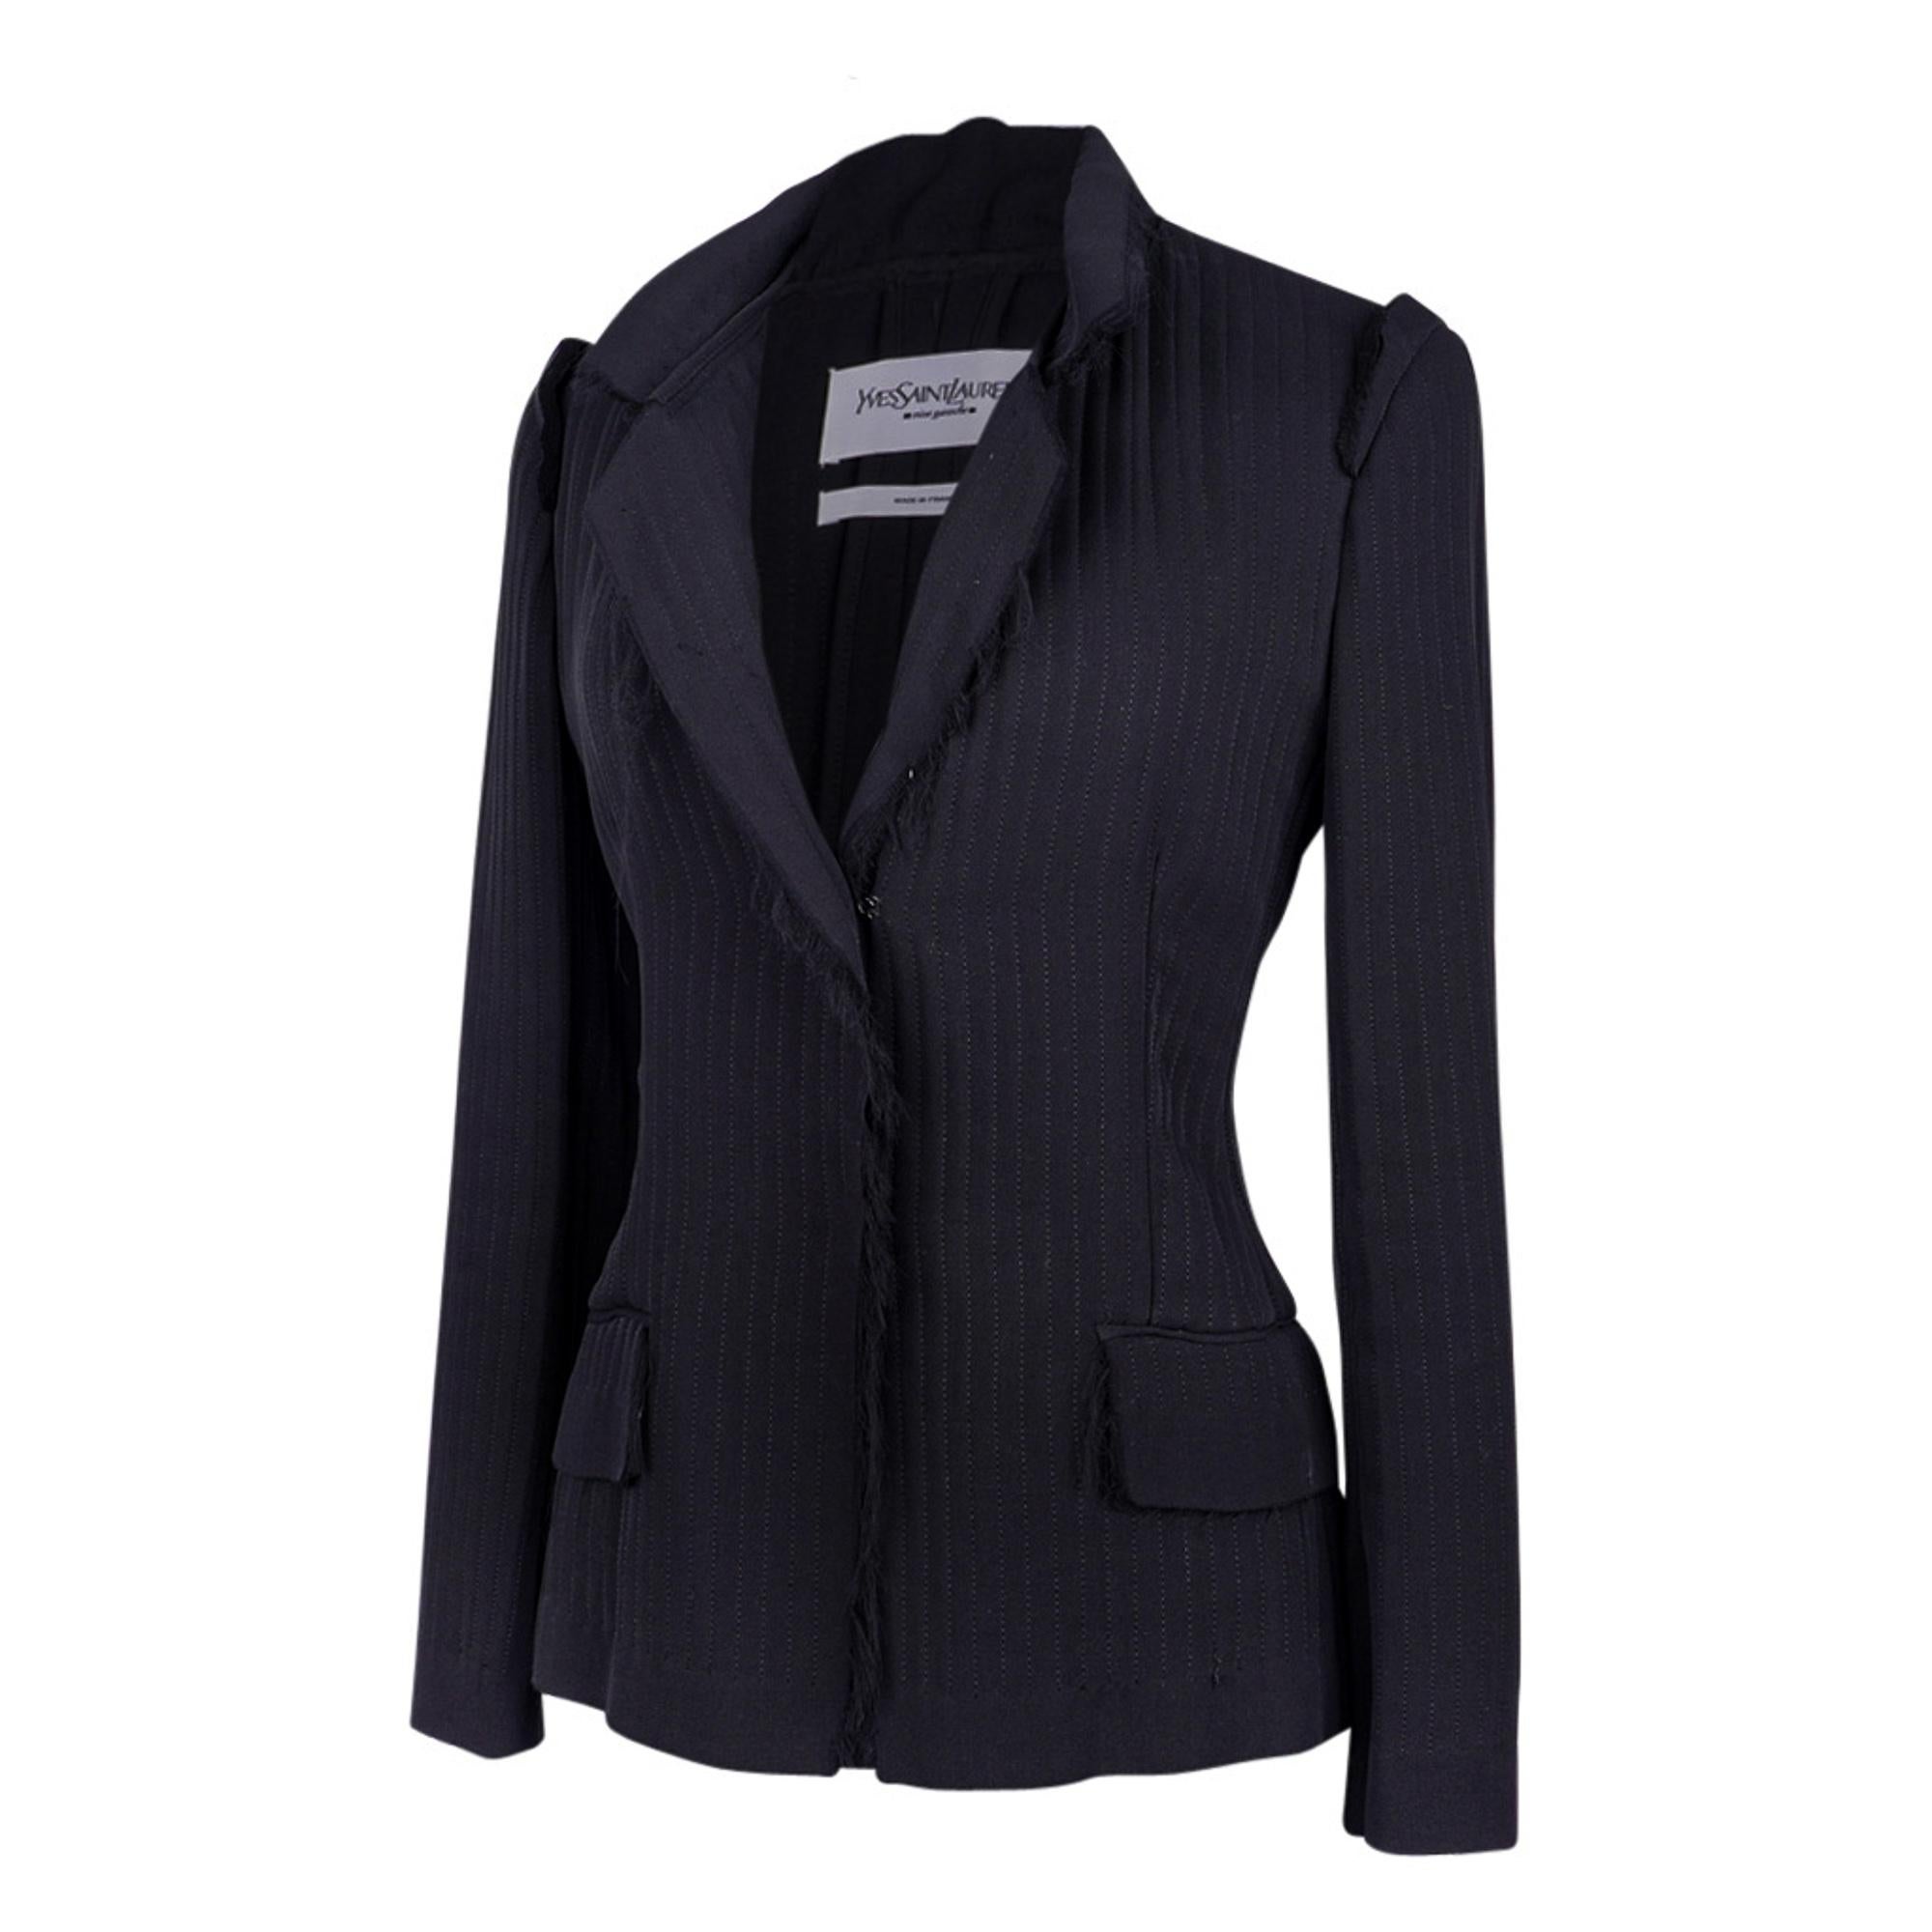 Black Yves Saint Laurent Jacket Exquisite Tom Ford Creation in Layers 36